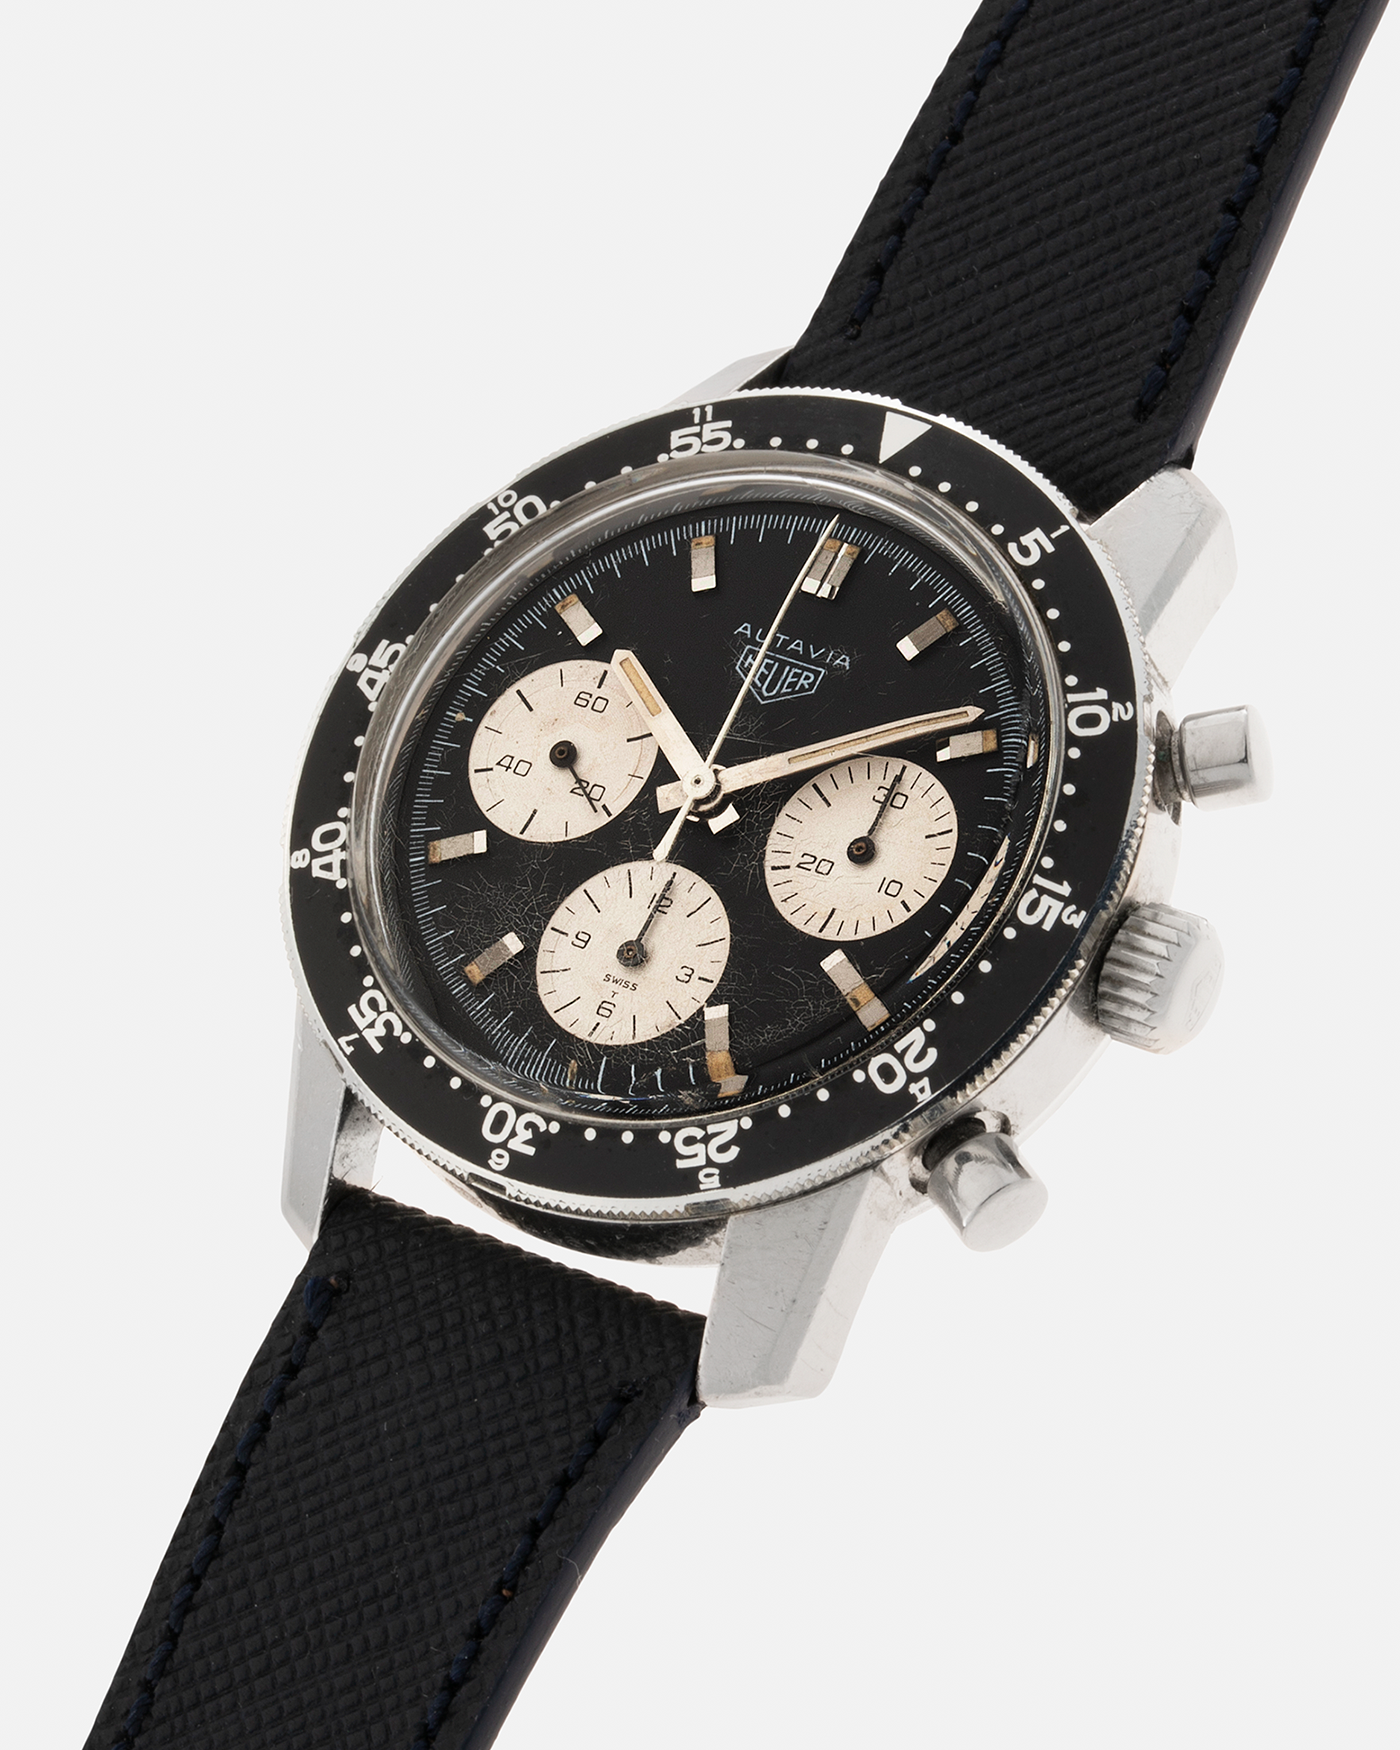 Brand: Heuer Year: 1960’s Model: Autavia Reference Number: 2446C MH (Compressor Case, Minute Hour Bezel) Serial Number: 108644 Material: Stainless Steel Movement: Valjoux Cal. 72, Manual-Winding Case Diameter: 40mm Lug Width: 20mm Strap: Molequin Navy Textured Calf Leather Strap